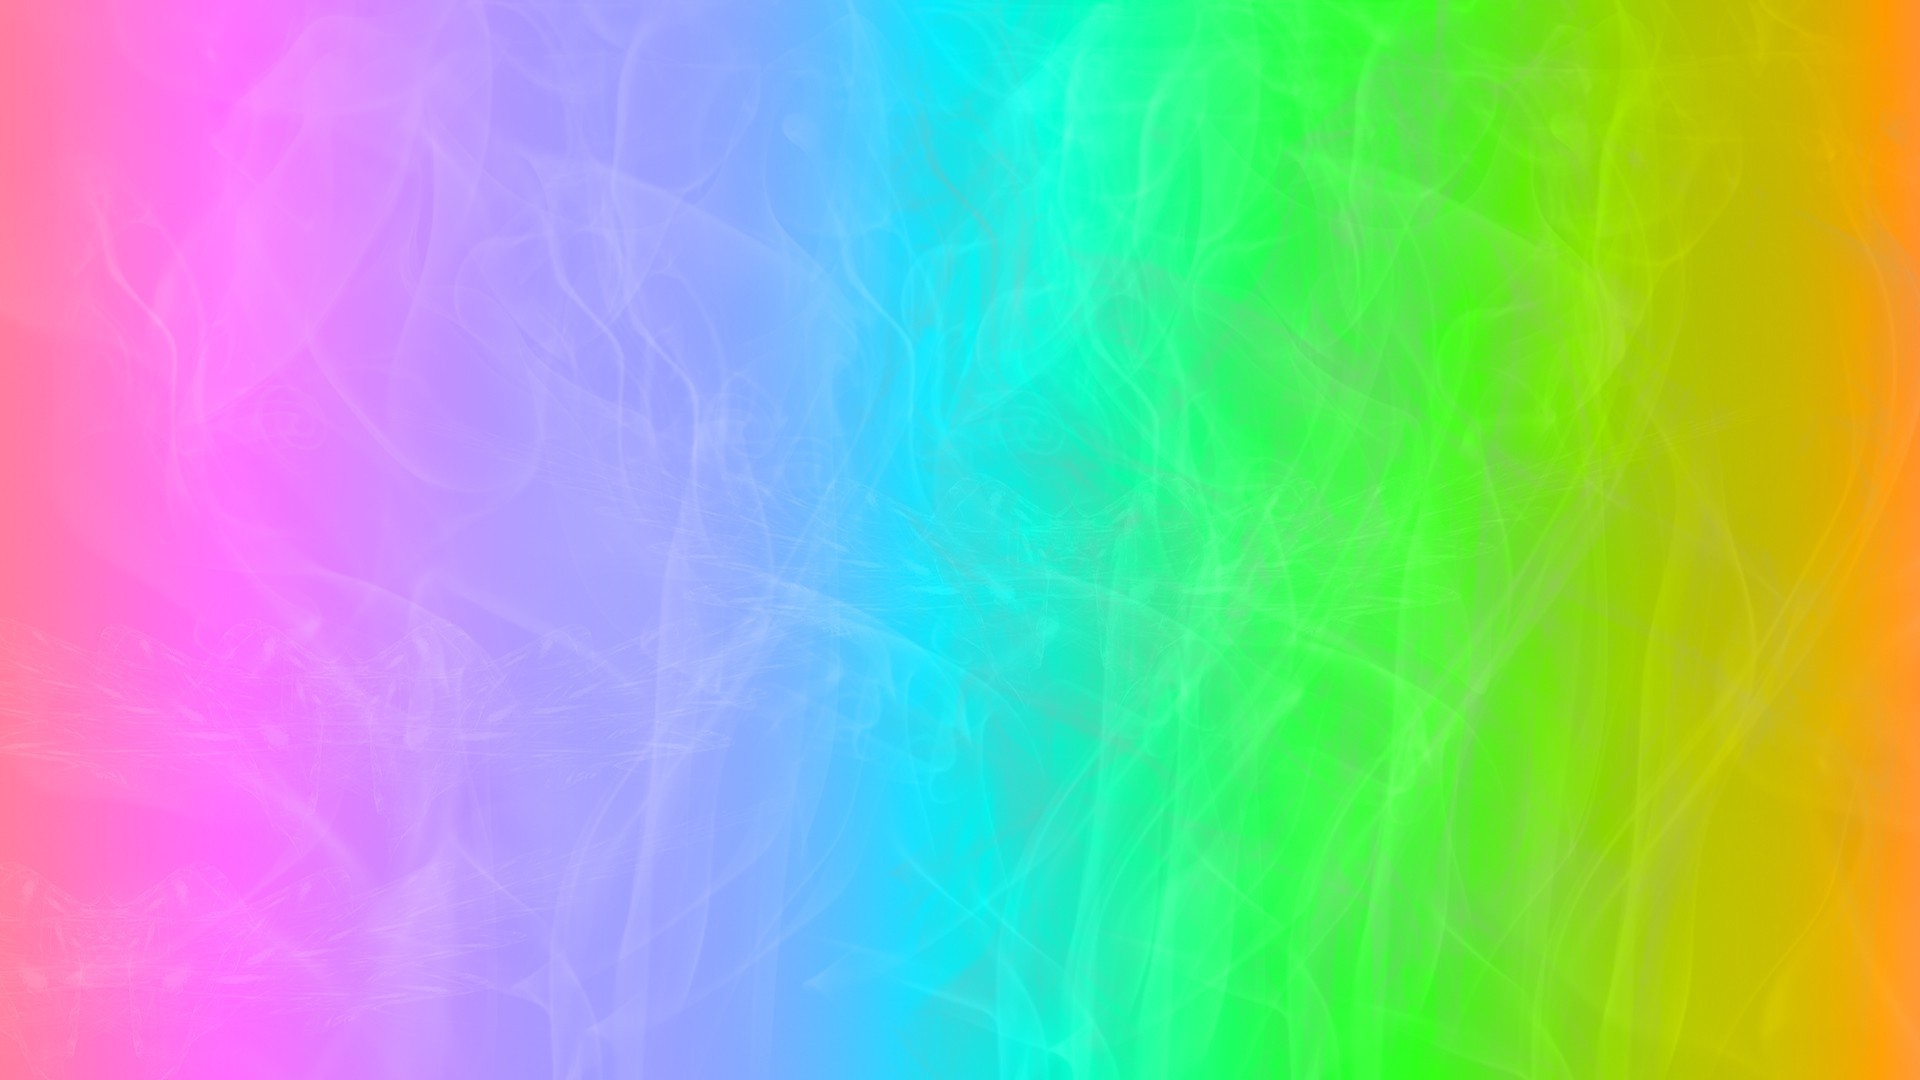 Free Download Colorful Backgrounds Wallpaper 1920x1080 6280 1920x1080 For Your Desktop Mobile Tablet Explore 77 Background Wallpaper Images Free Desktop Wallpaper Free Wallpaper For Computer Free Background Pictures And Wallpaper - roblox background image 1280 x 720